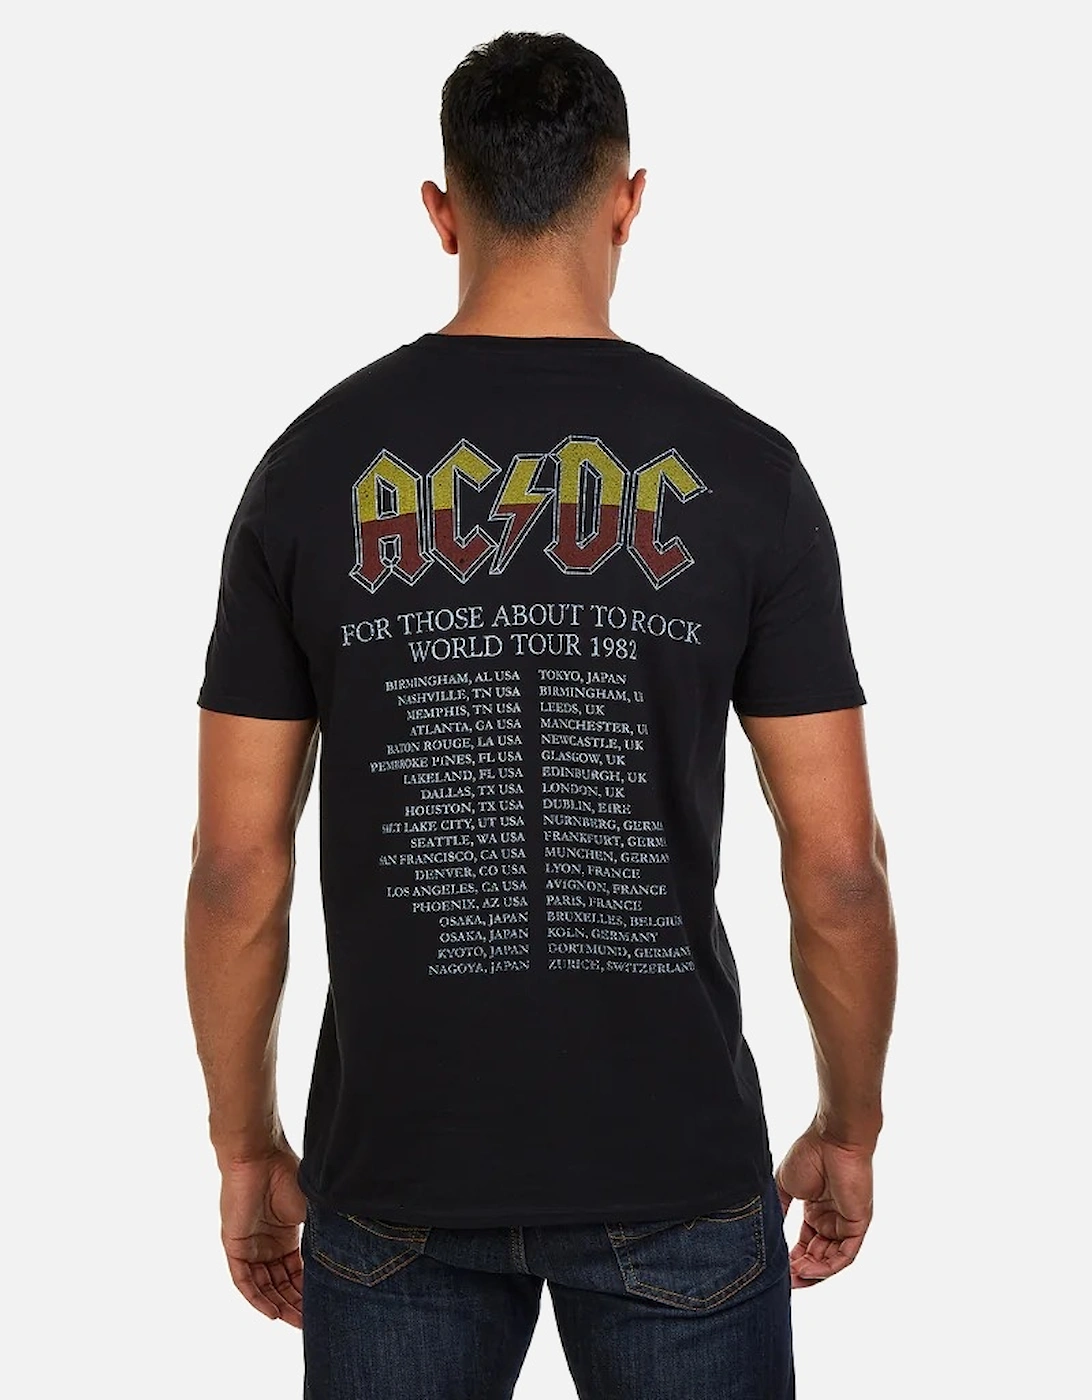 Boys About To Rock Tour T-Shirt